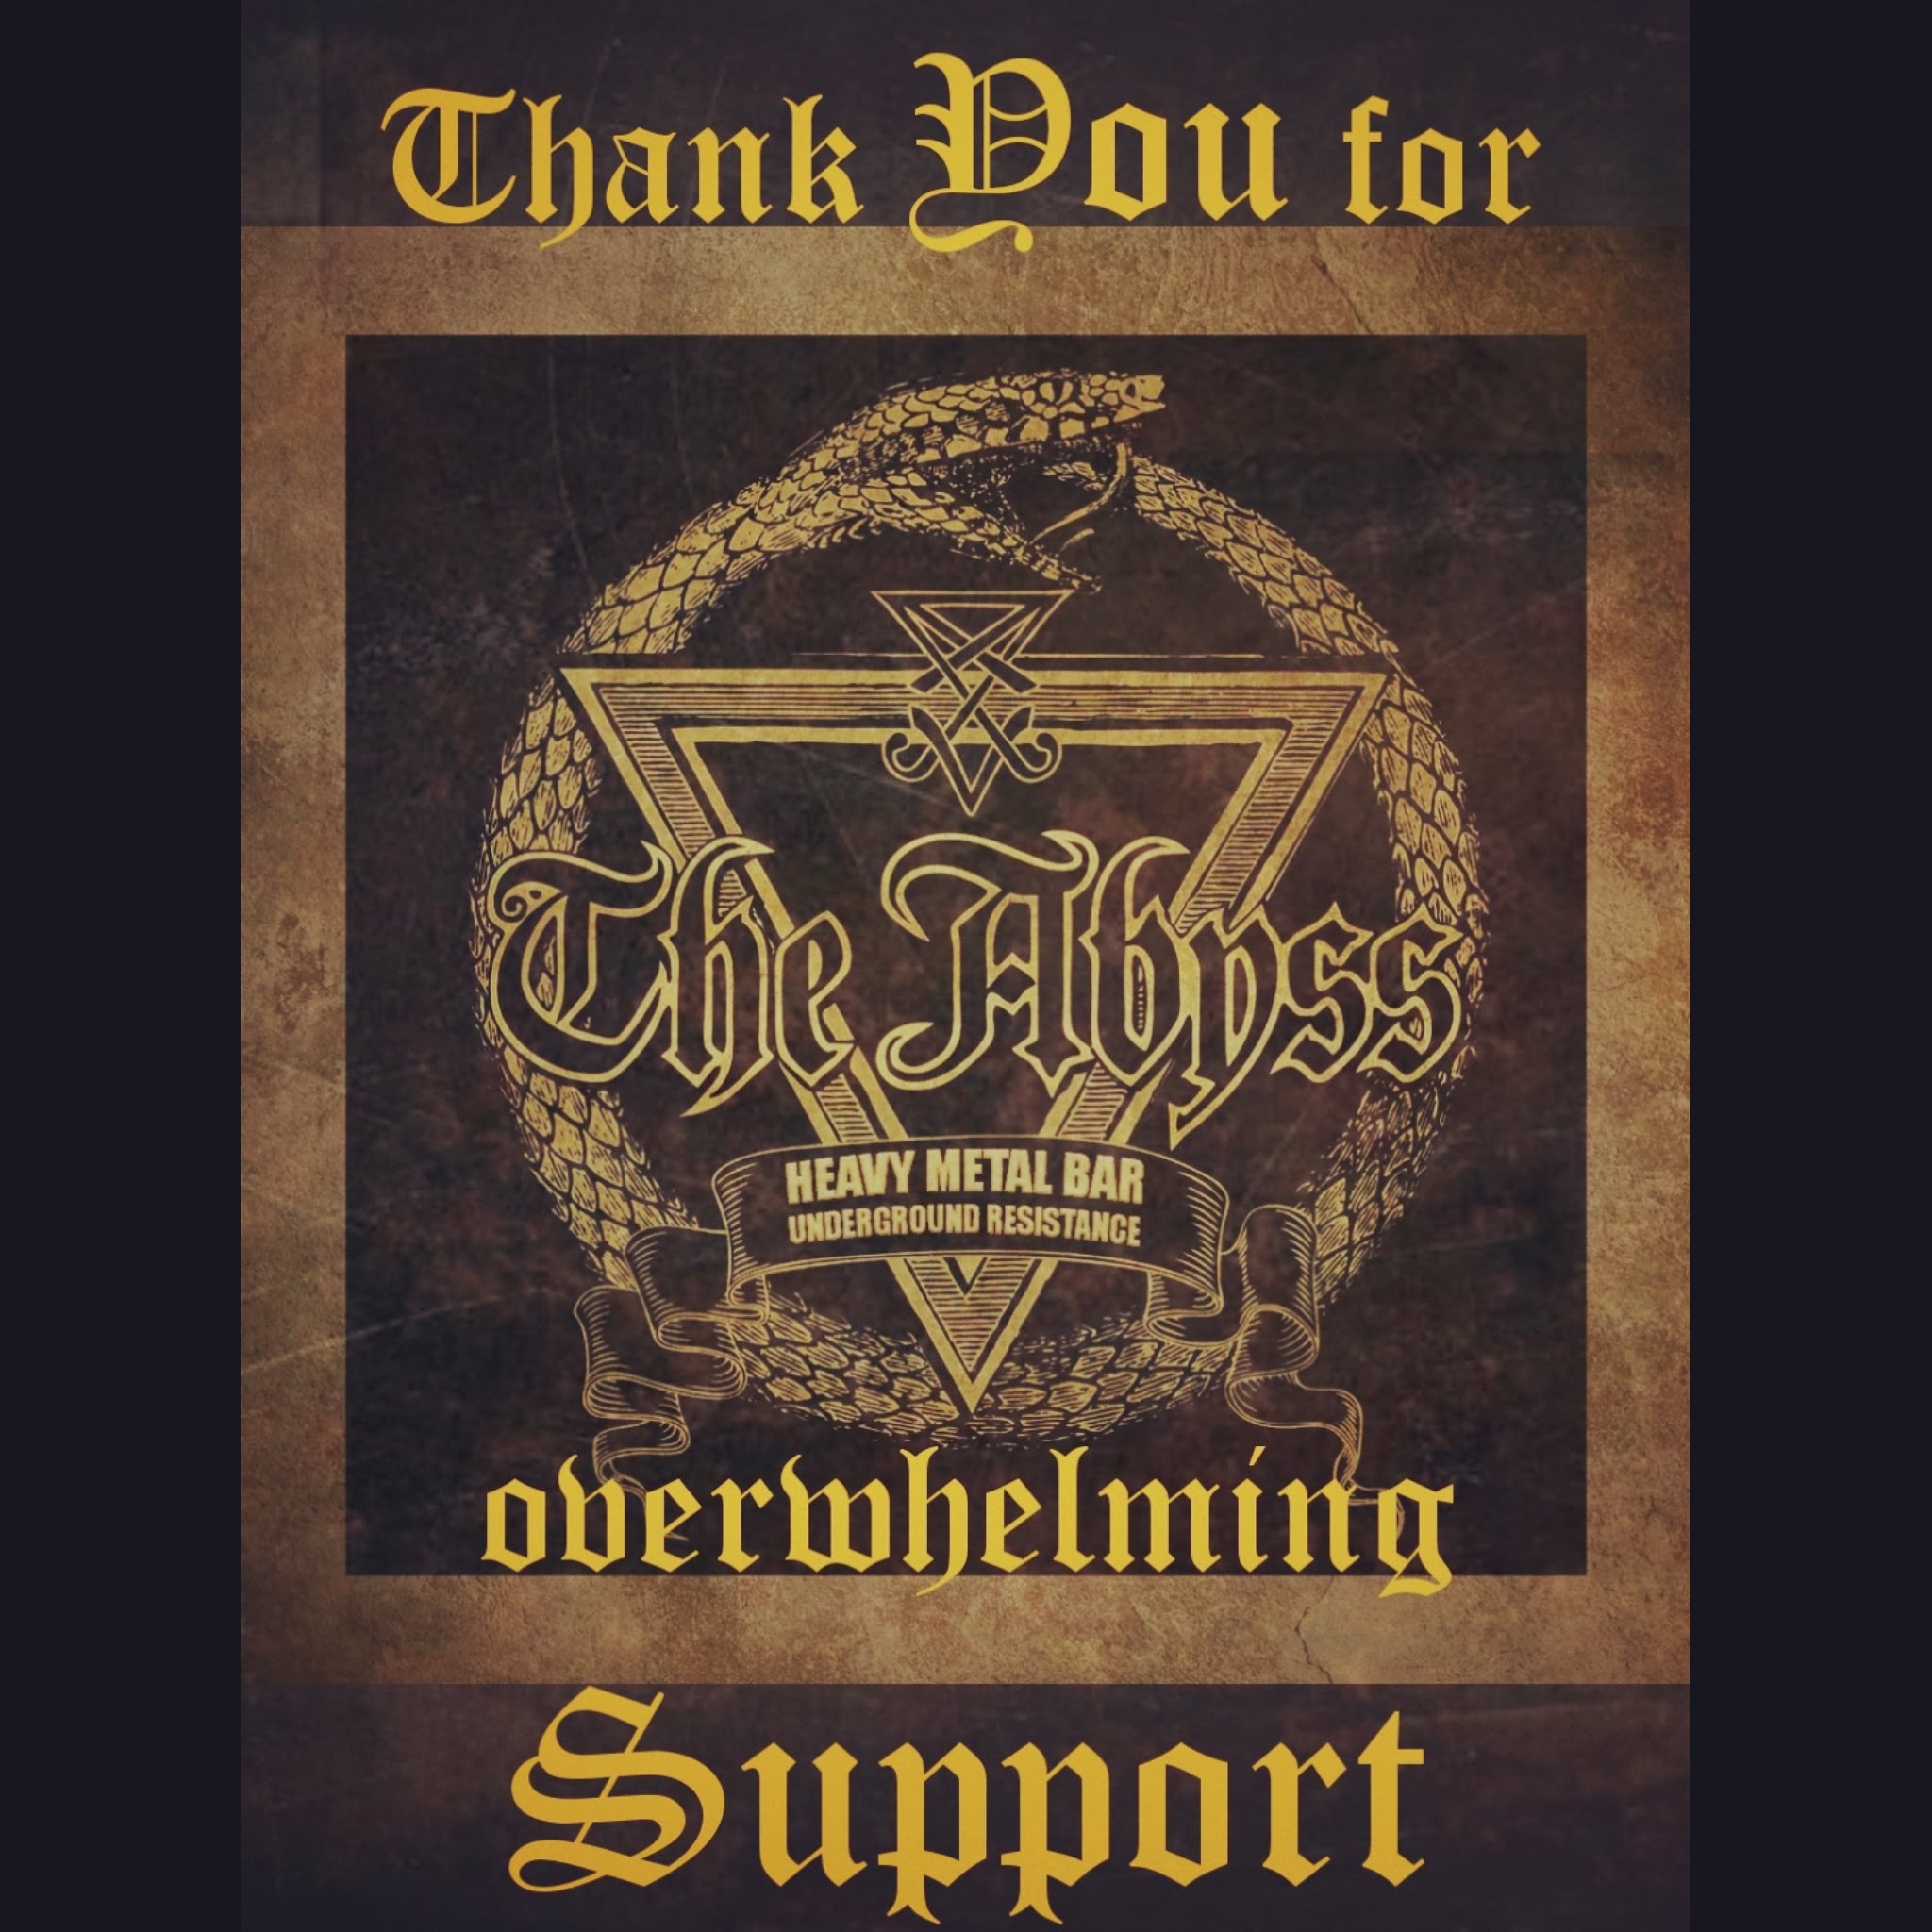 The Abyss - Overwhelmed by support - THANK YOU